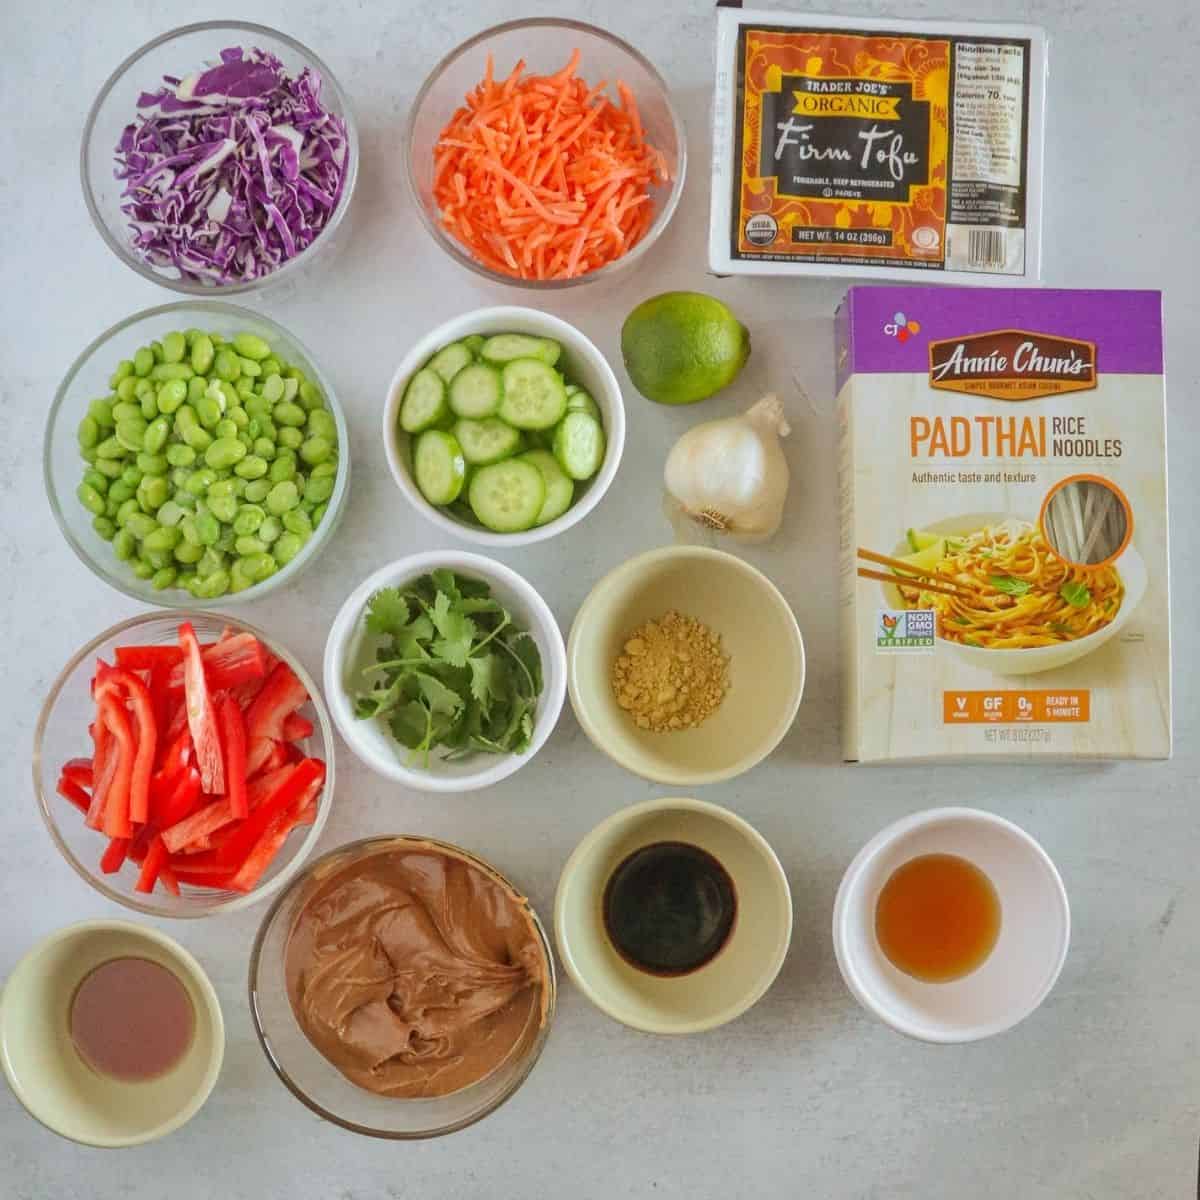 Bowls with ingredients and box of noodles on white counter